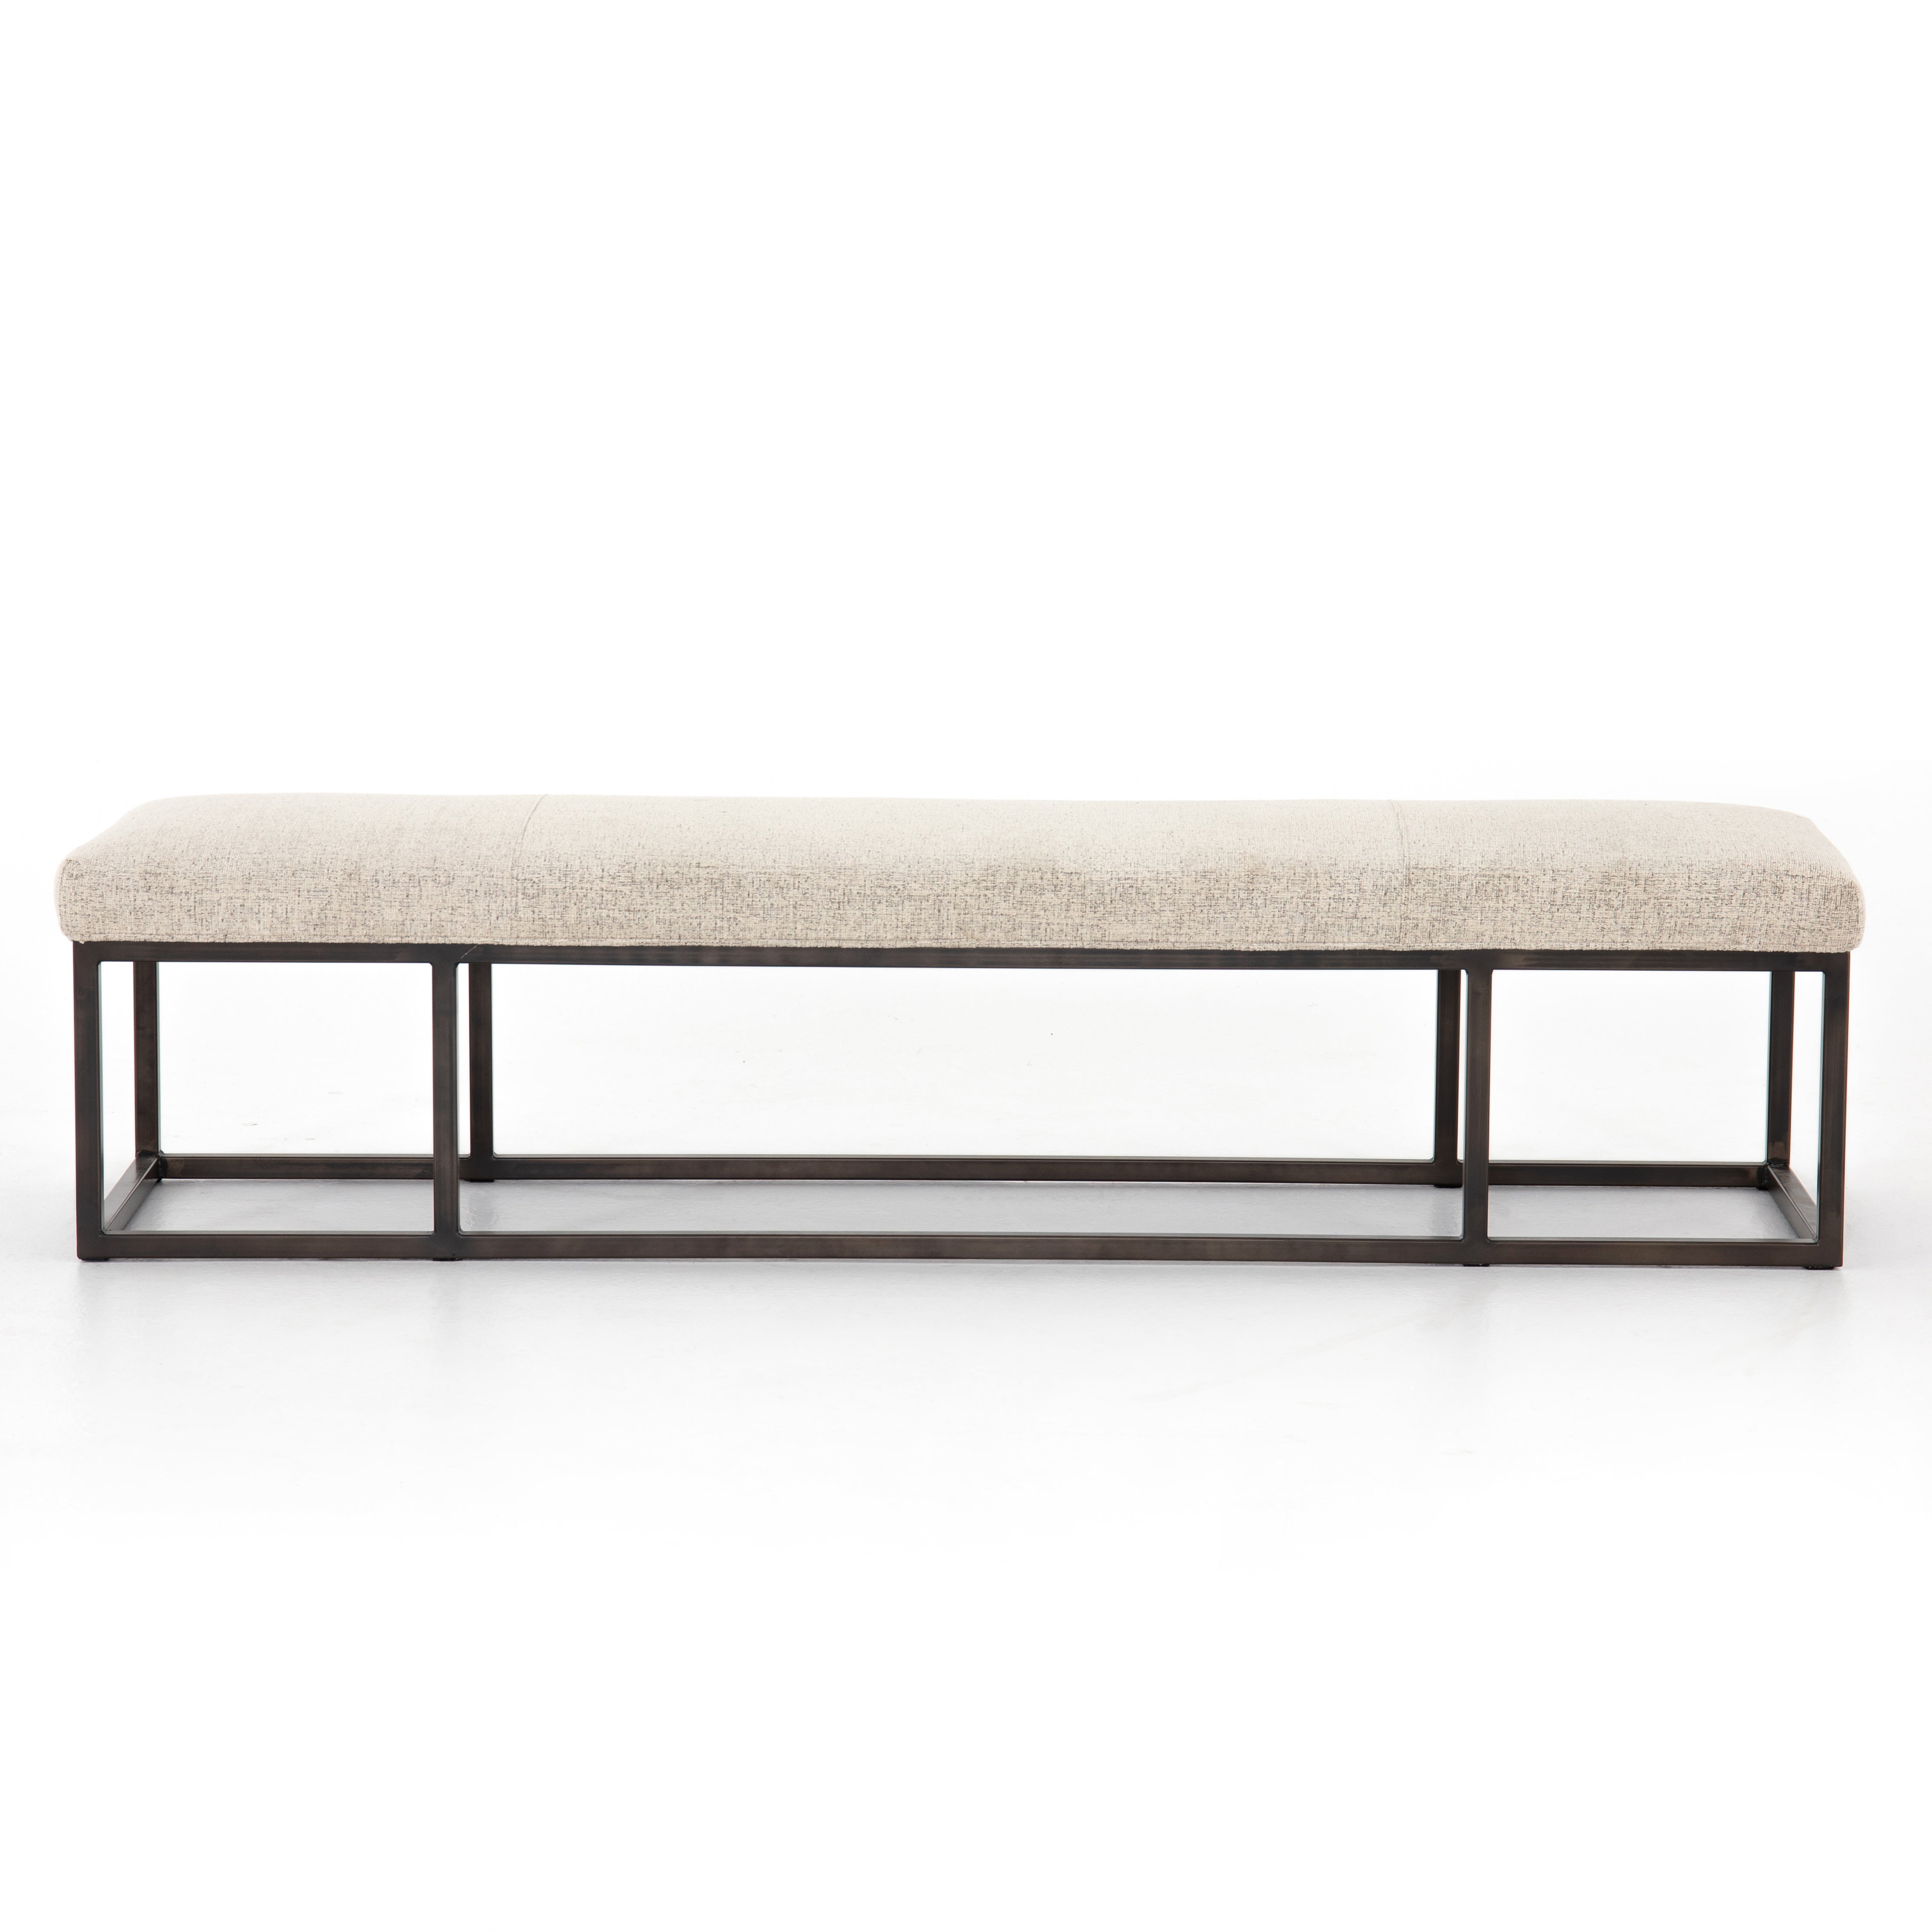 The Beaumont Plushtone Linen Bench has streamlined shaping and is textural to the touch. Gunmetal-finished iron framing stands slim and structured to support a well-tailored top of plush, linen-like upholstery. Open, adaptable styling allows for versatile placement options.  Size: 72"w x 20"d x 17"h